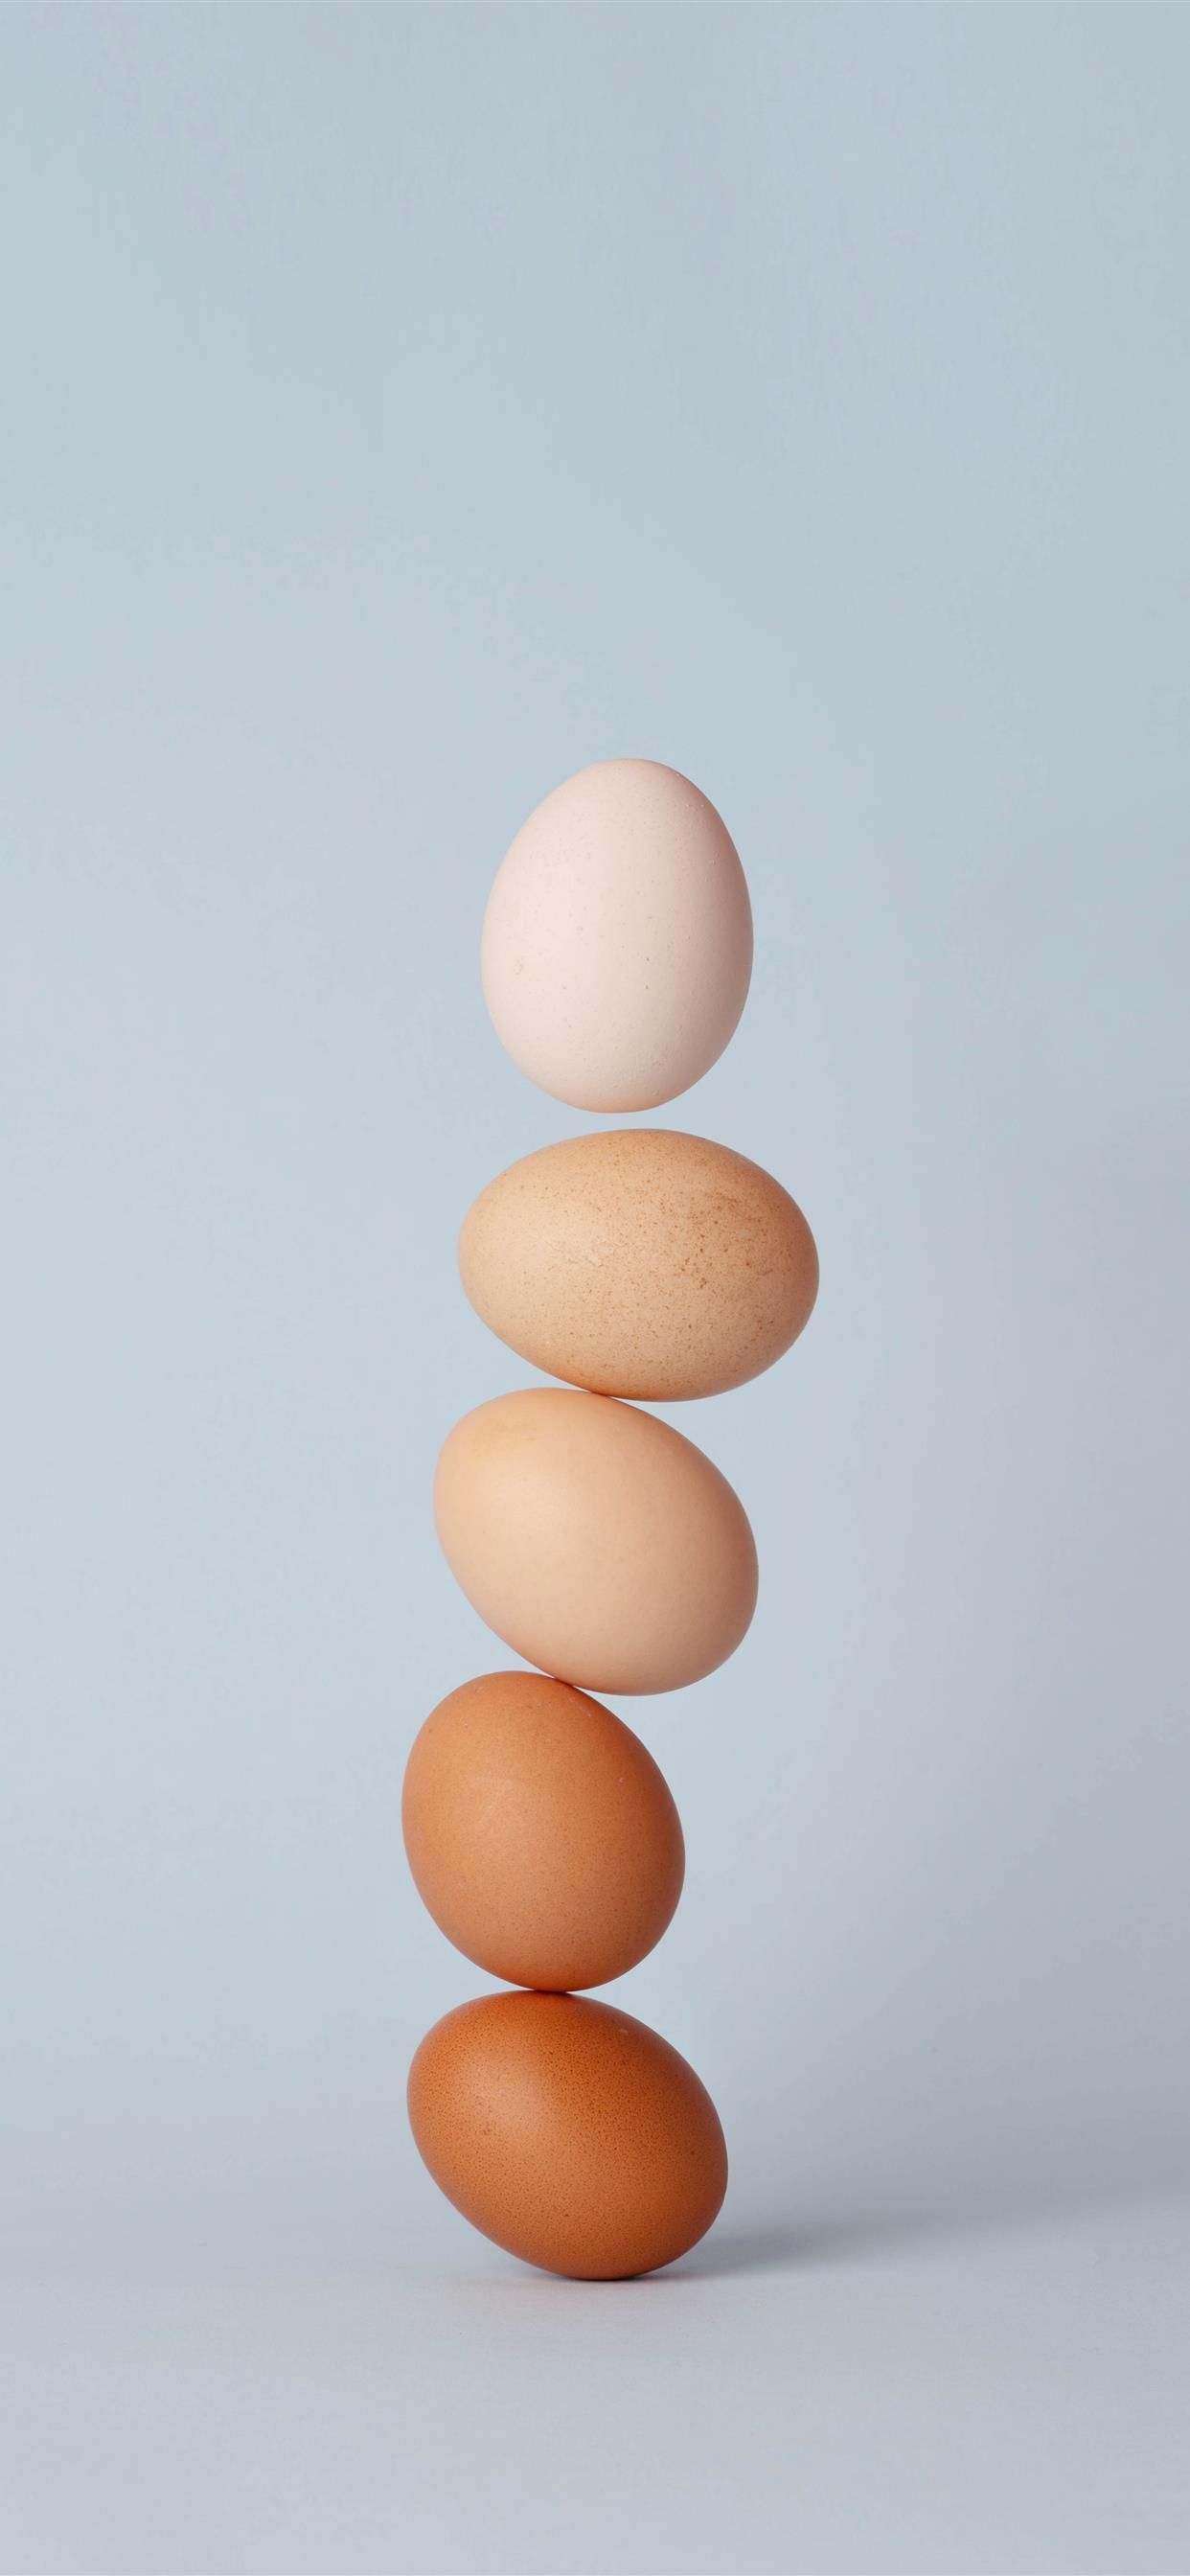 egg iPhone X Wallpaper Free Download